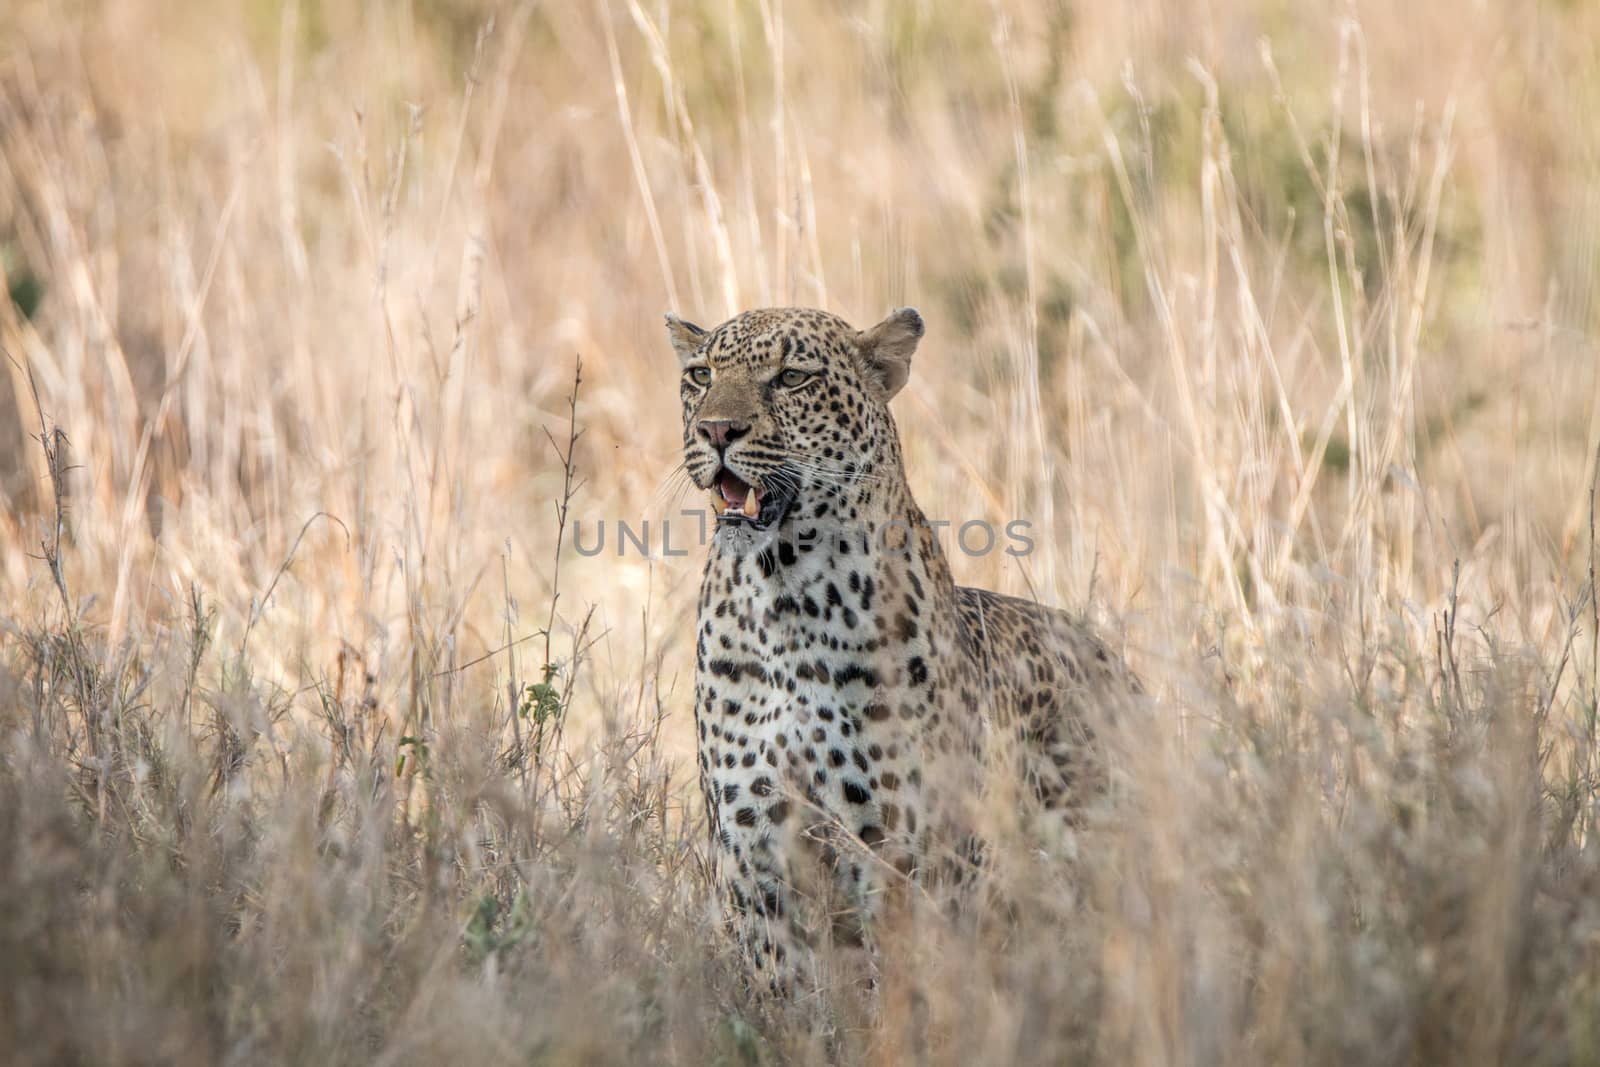 Leopard in the grass in the Kruger National Park by Simoneemanphotography